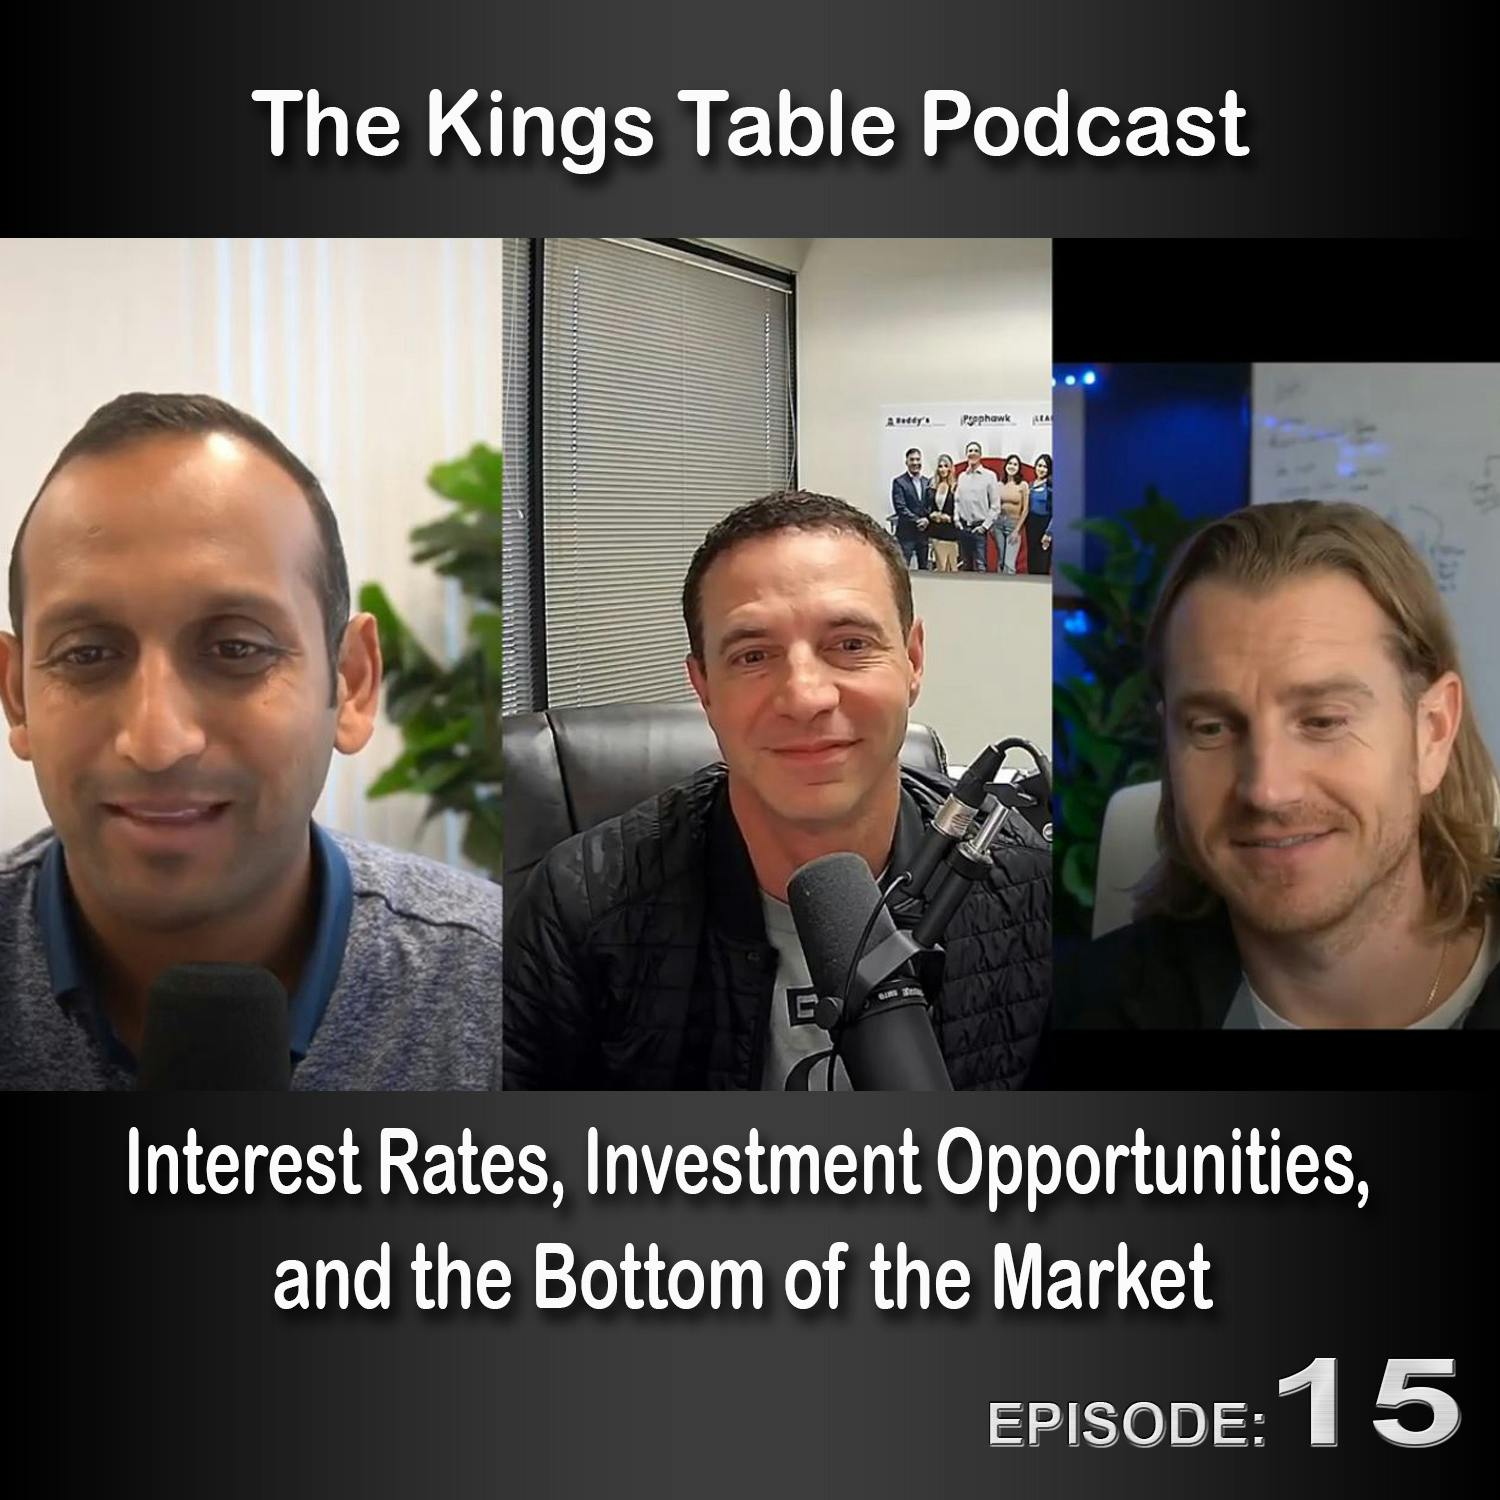 The Kings Table Episode 15 – Interest Rates, Investment Opportunities, and the Bottom of the Market